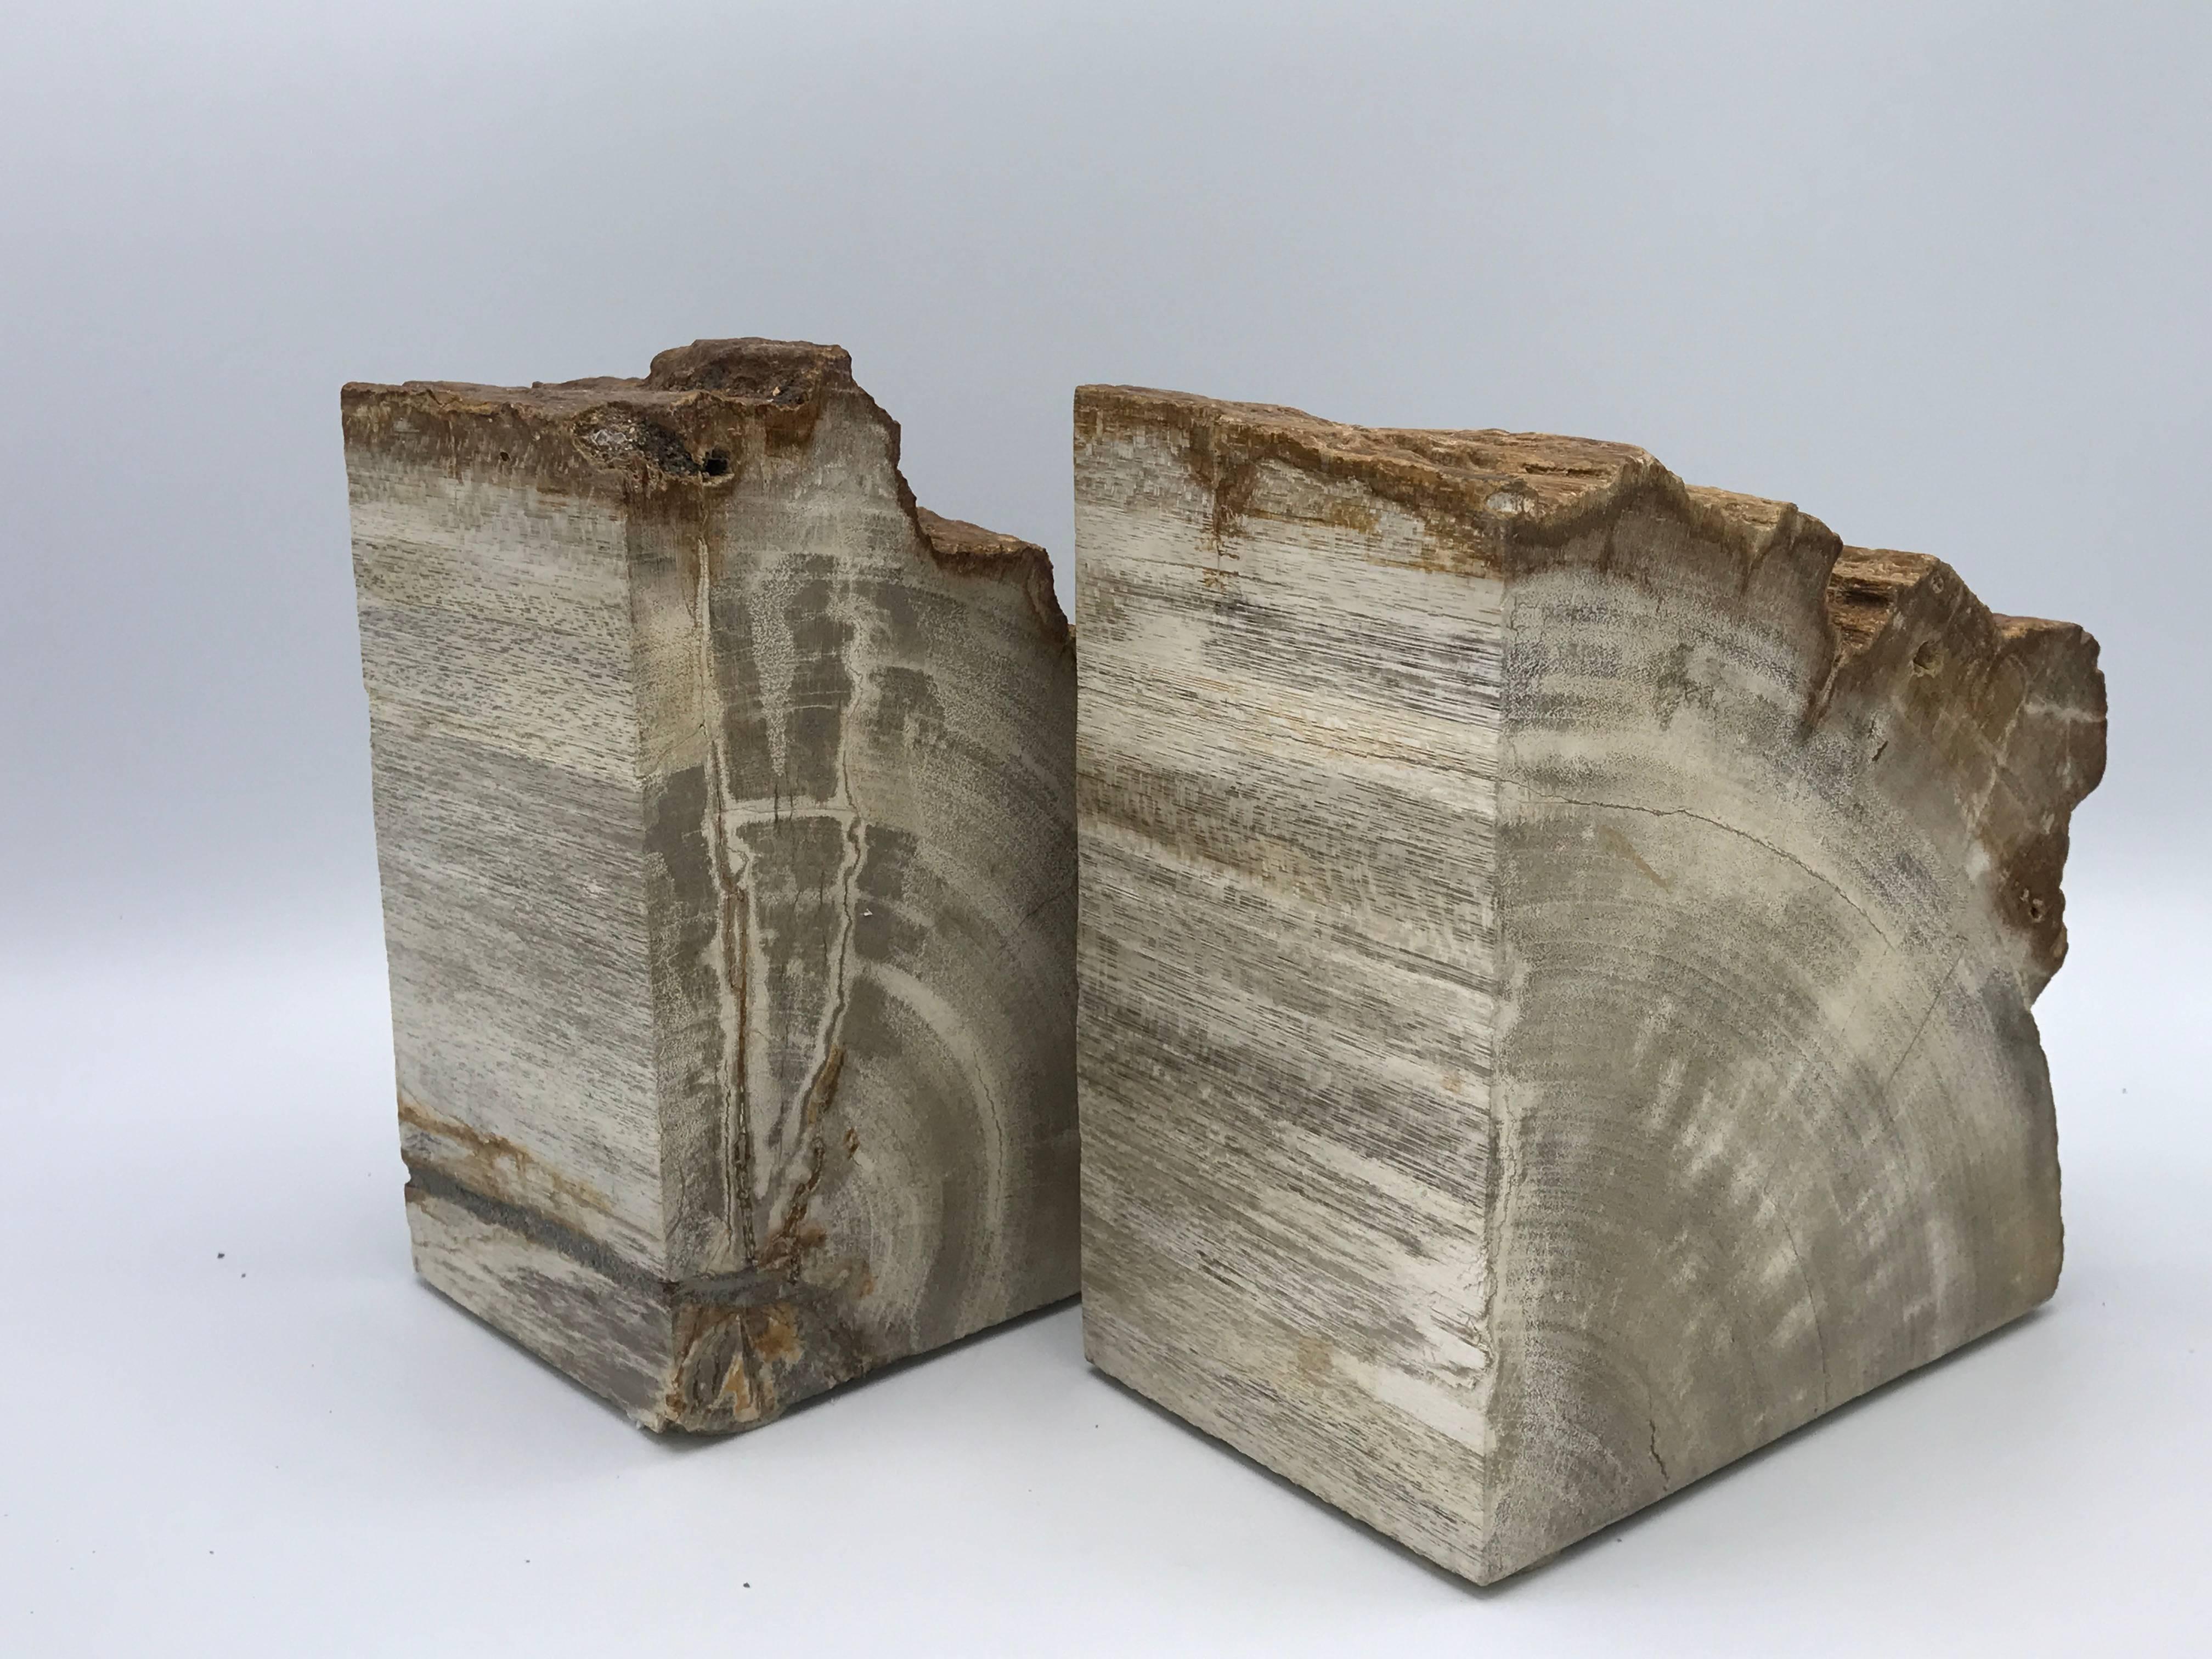 Offered is a stunning pair of 1950s petrified wood bookends. Approx. weight is 25ibs for the pair, great for large books.